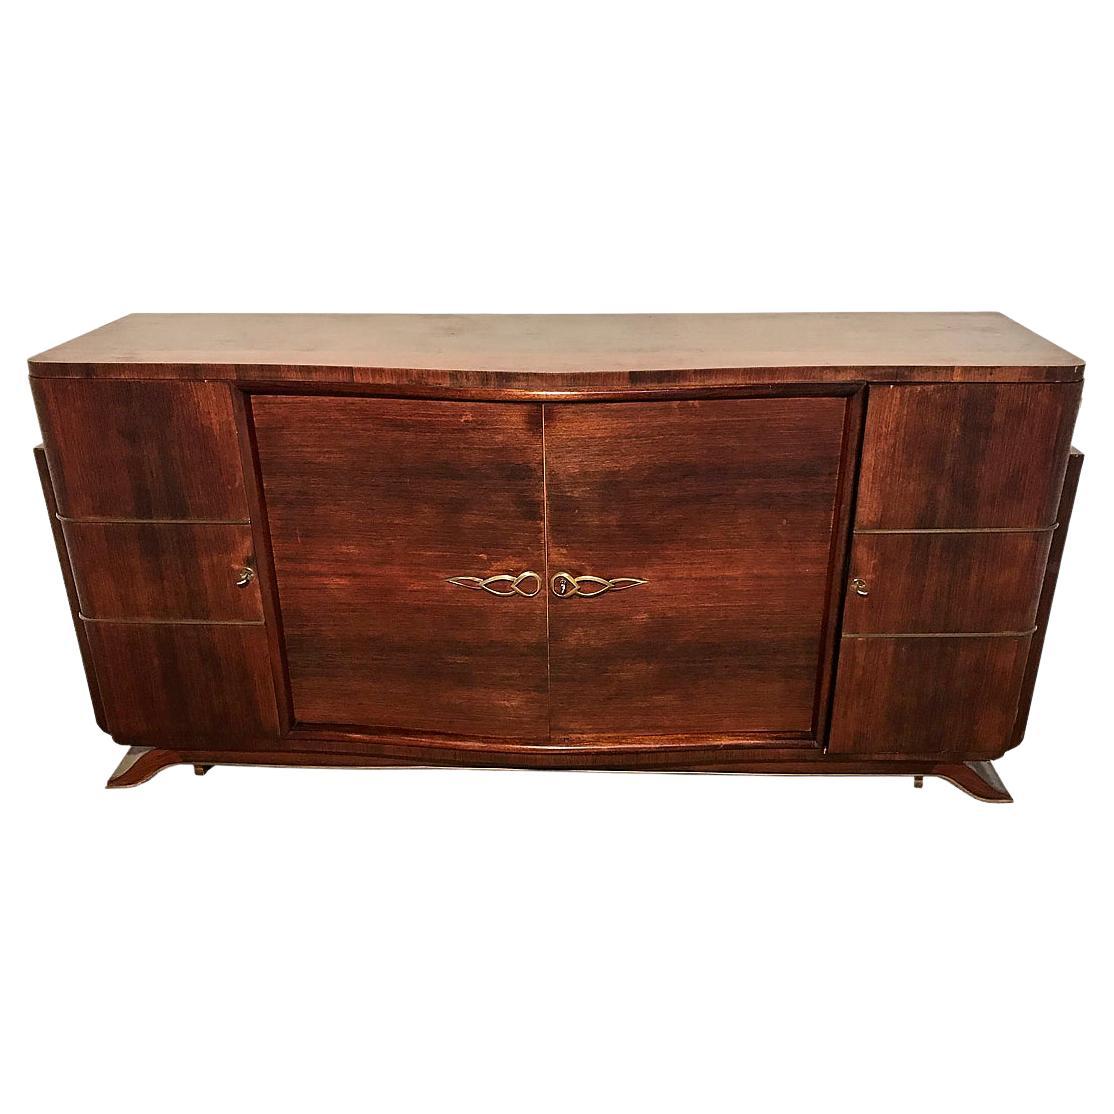 Art Deco Sideboard with Fine Rosewood Veneer and Brass Strips from Paris, 1925 For Sale